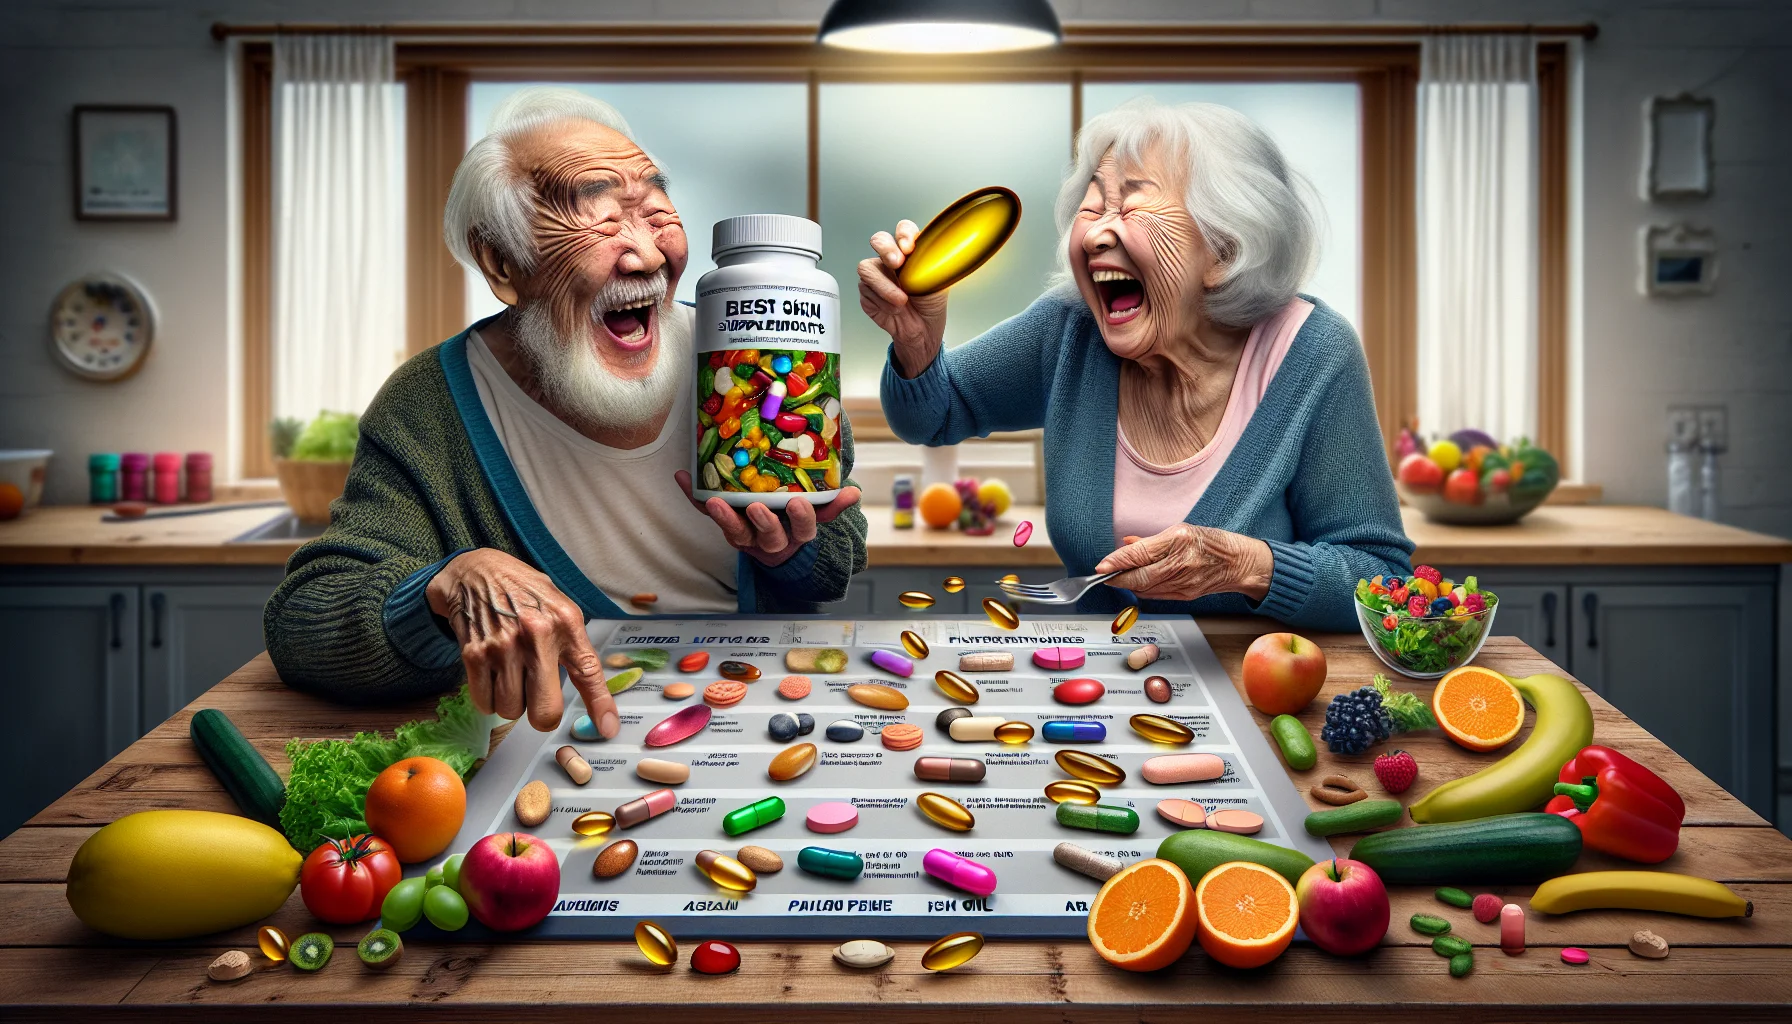 Imagine an amusing yet realistic scene encapsulating the importance of skin supplements for the aging population. Picture this: A jovially wrinkled Asian elderly man diligently studying a large, colorful chart of the best skin supplements, with vitamin bottles labelled with their benefits standing majestically next to him. At the same time, a white elderly woman, replete with laughter lines, is preparing a vibrant salad packed with nutritious elements, trying to balance a large fish oil capsule on top. They're sitting at a wooden kitchen table full of fruits and vegetables, highlighting the notion of a balanced diet and the humor within their efforts.